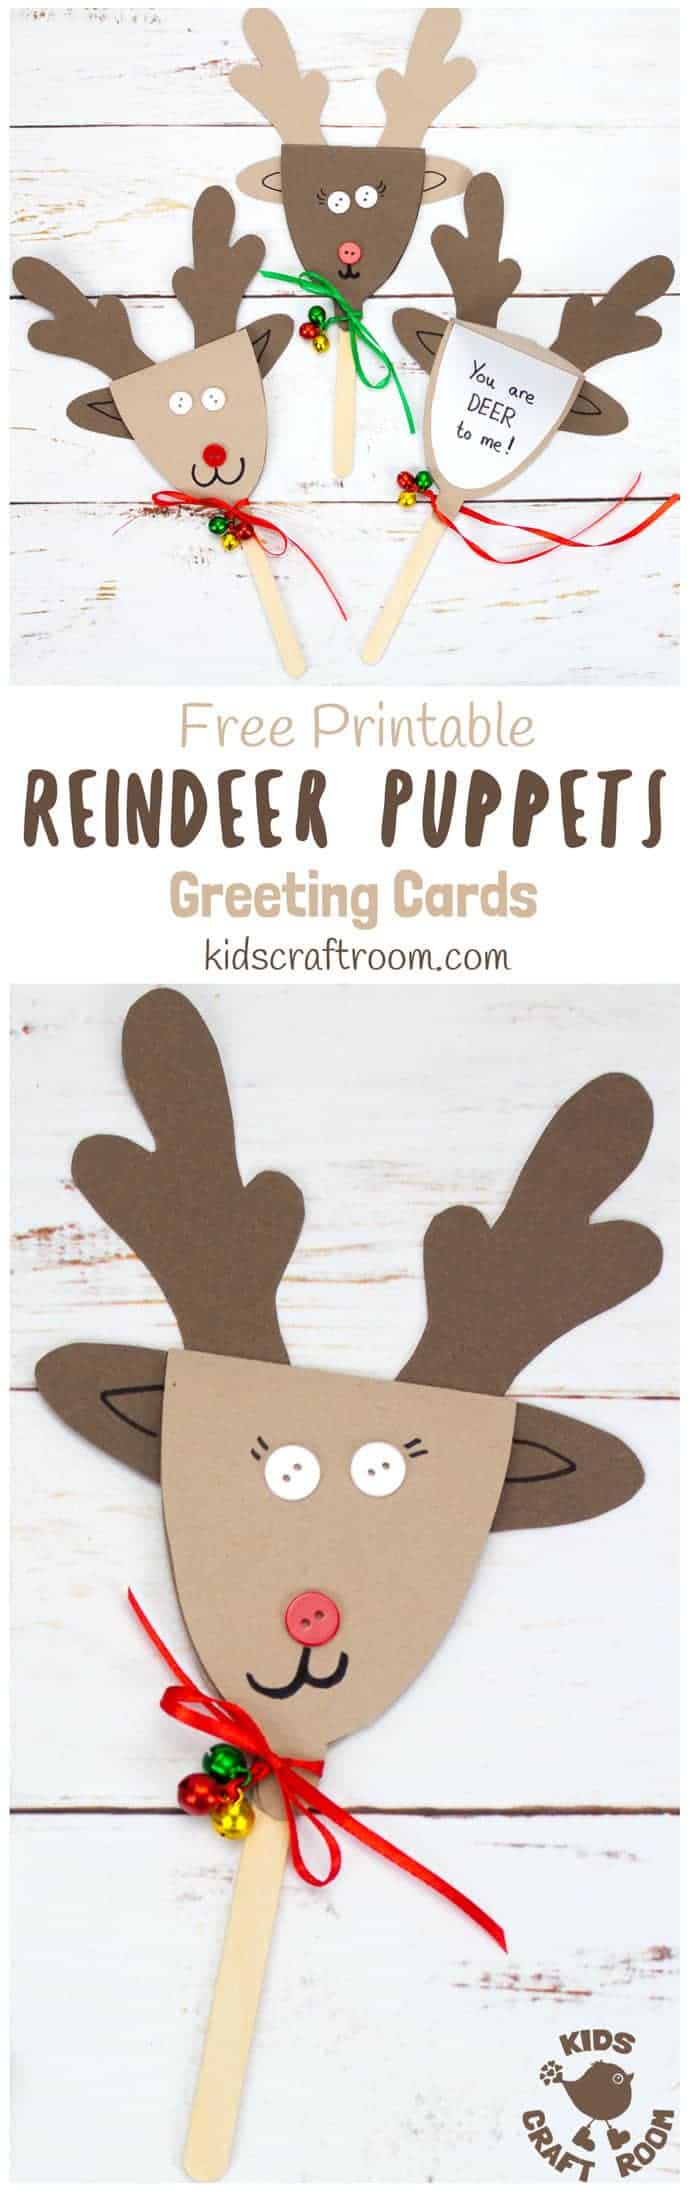 REINDEER PUPPET GREETING CARDS - These Rudolf Puppets are so fun to make and because they double up to be surprise greeting cards they are perfect for sharing some festive cheer to friends and family too. They are Christmas on a stick literally! #Christmas #Christmascrafts #Christmascraftideas #kidscrafts #reindeer #Rudolf #reindeercrafts #rudolfcrafts #puppets #puppetcrafts #chistmaspuppets #greetingcards #Christmascards #kidscraftroom